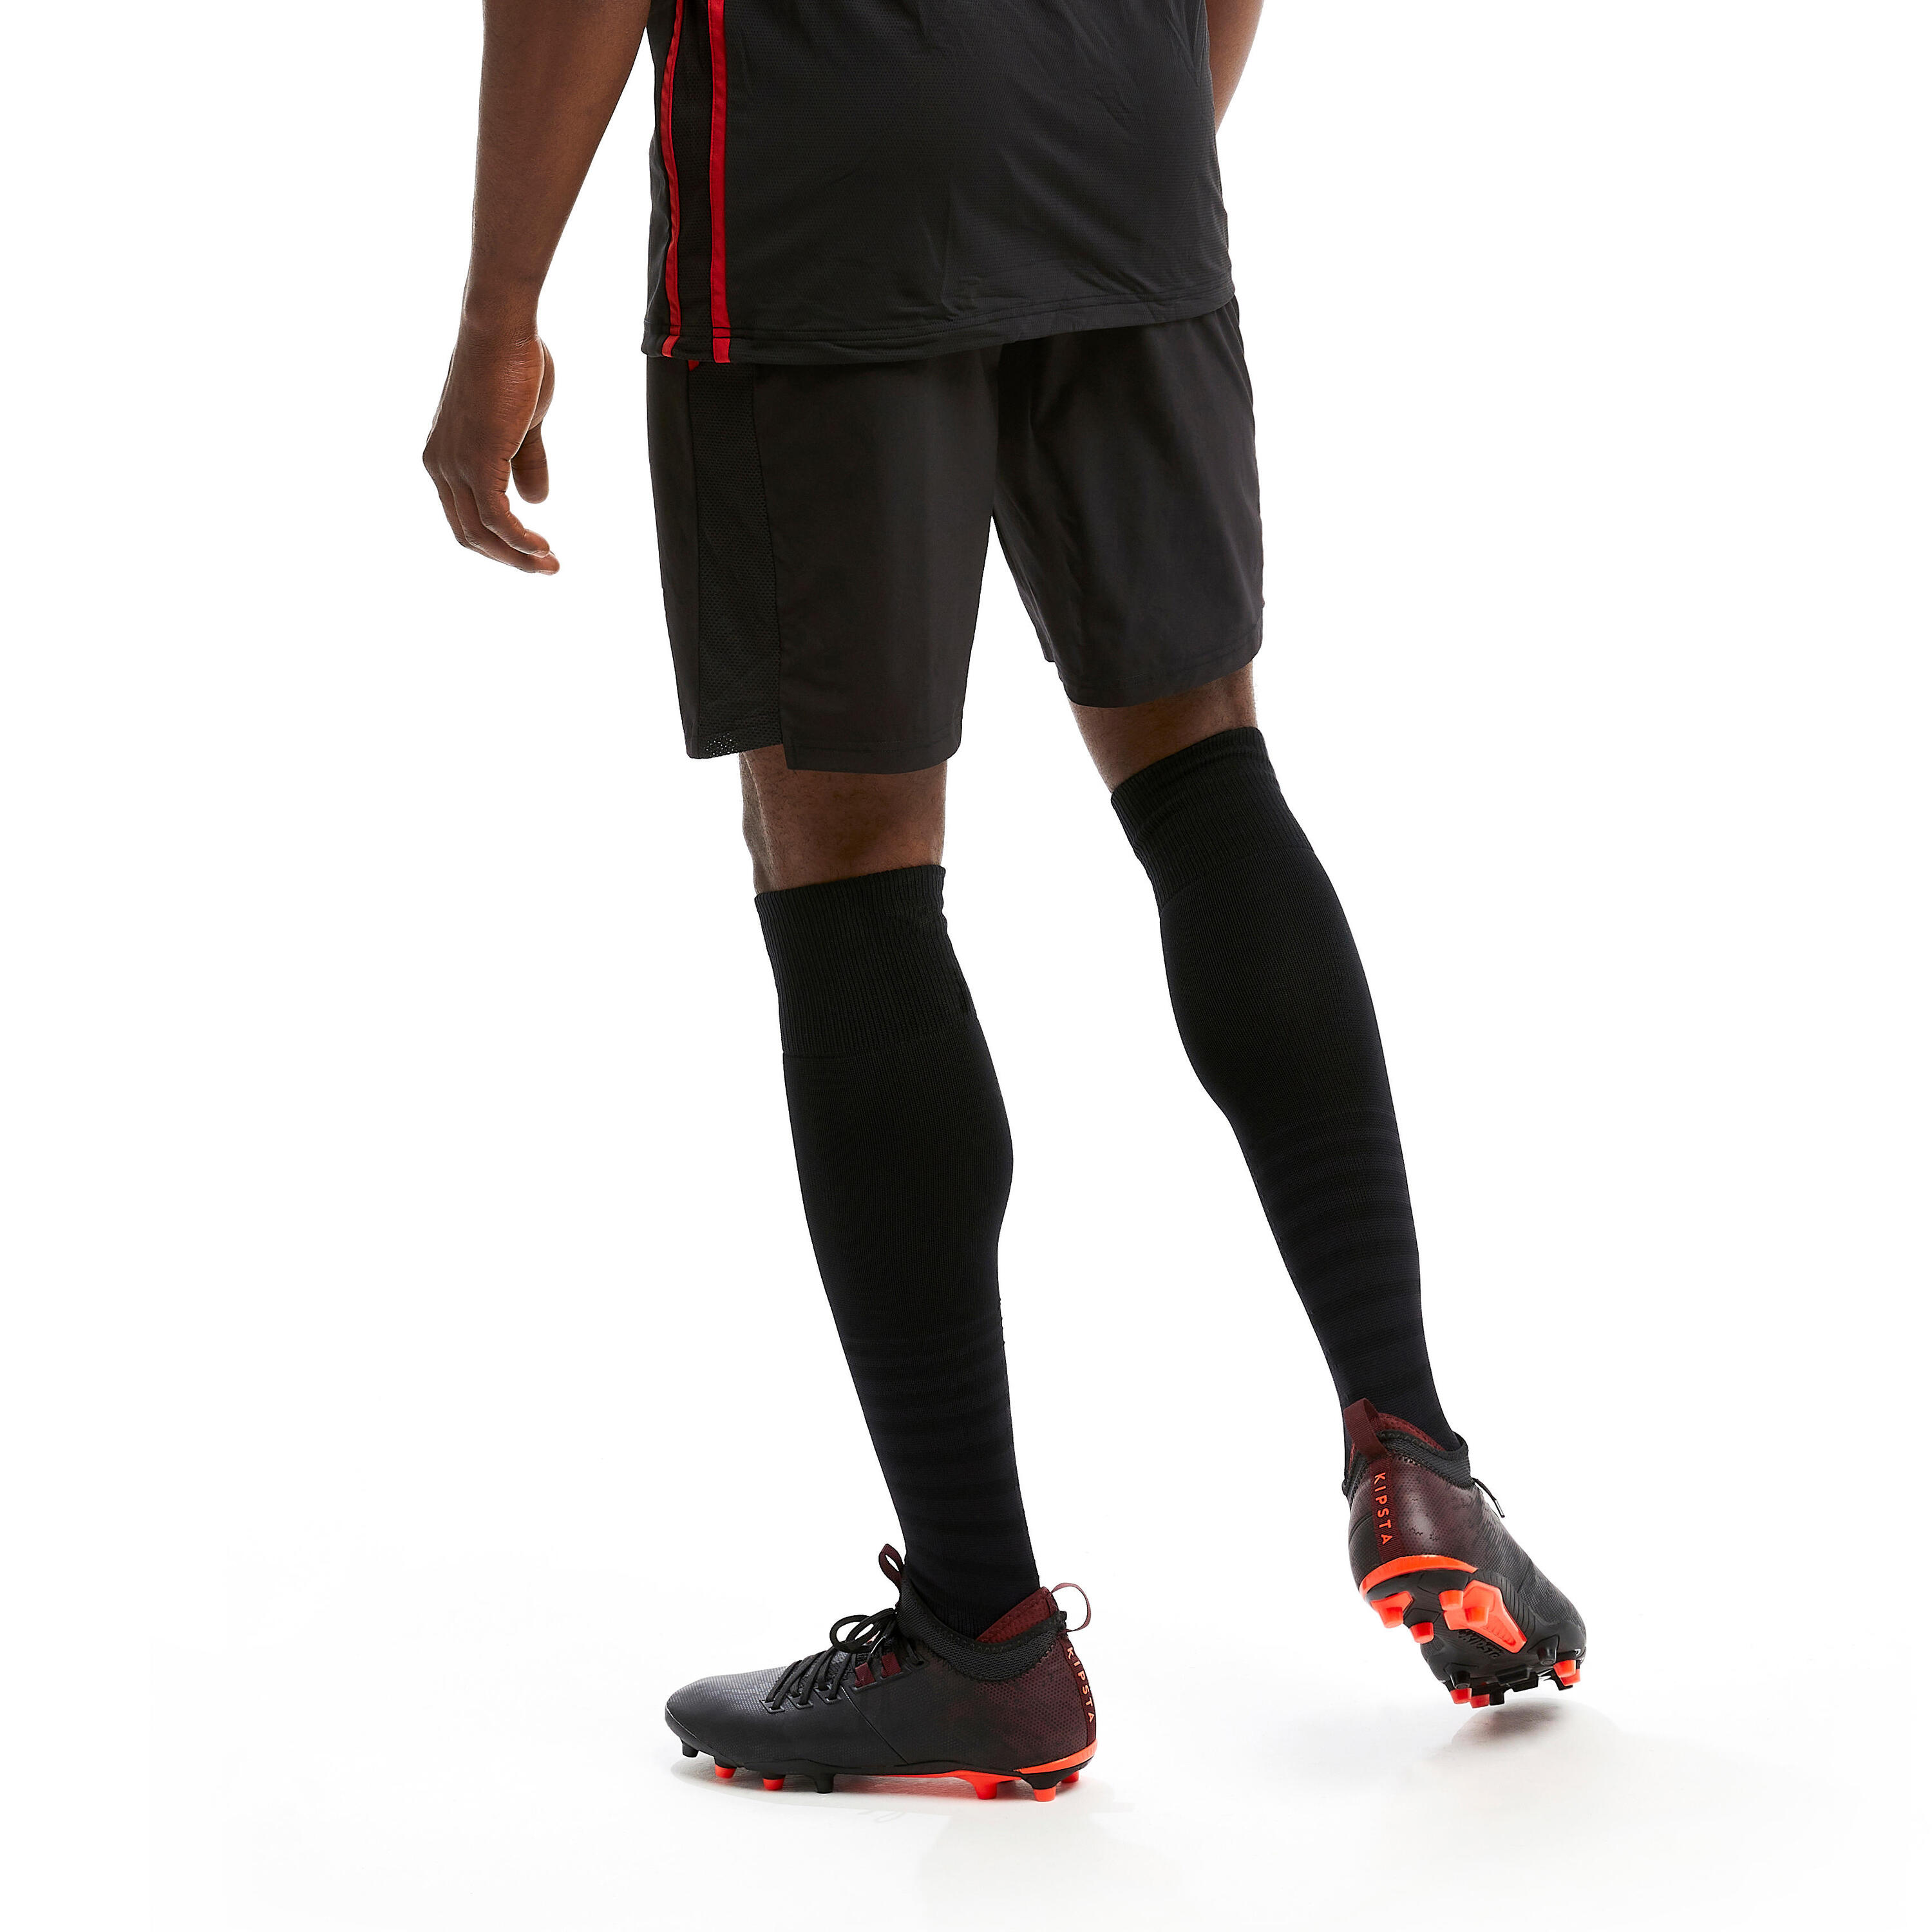 Adult 3-in-1 Football Shorts Traxium - Black/Red 4/9